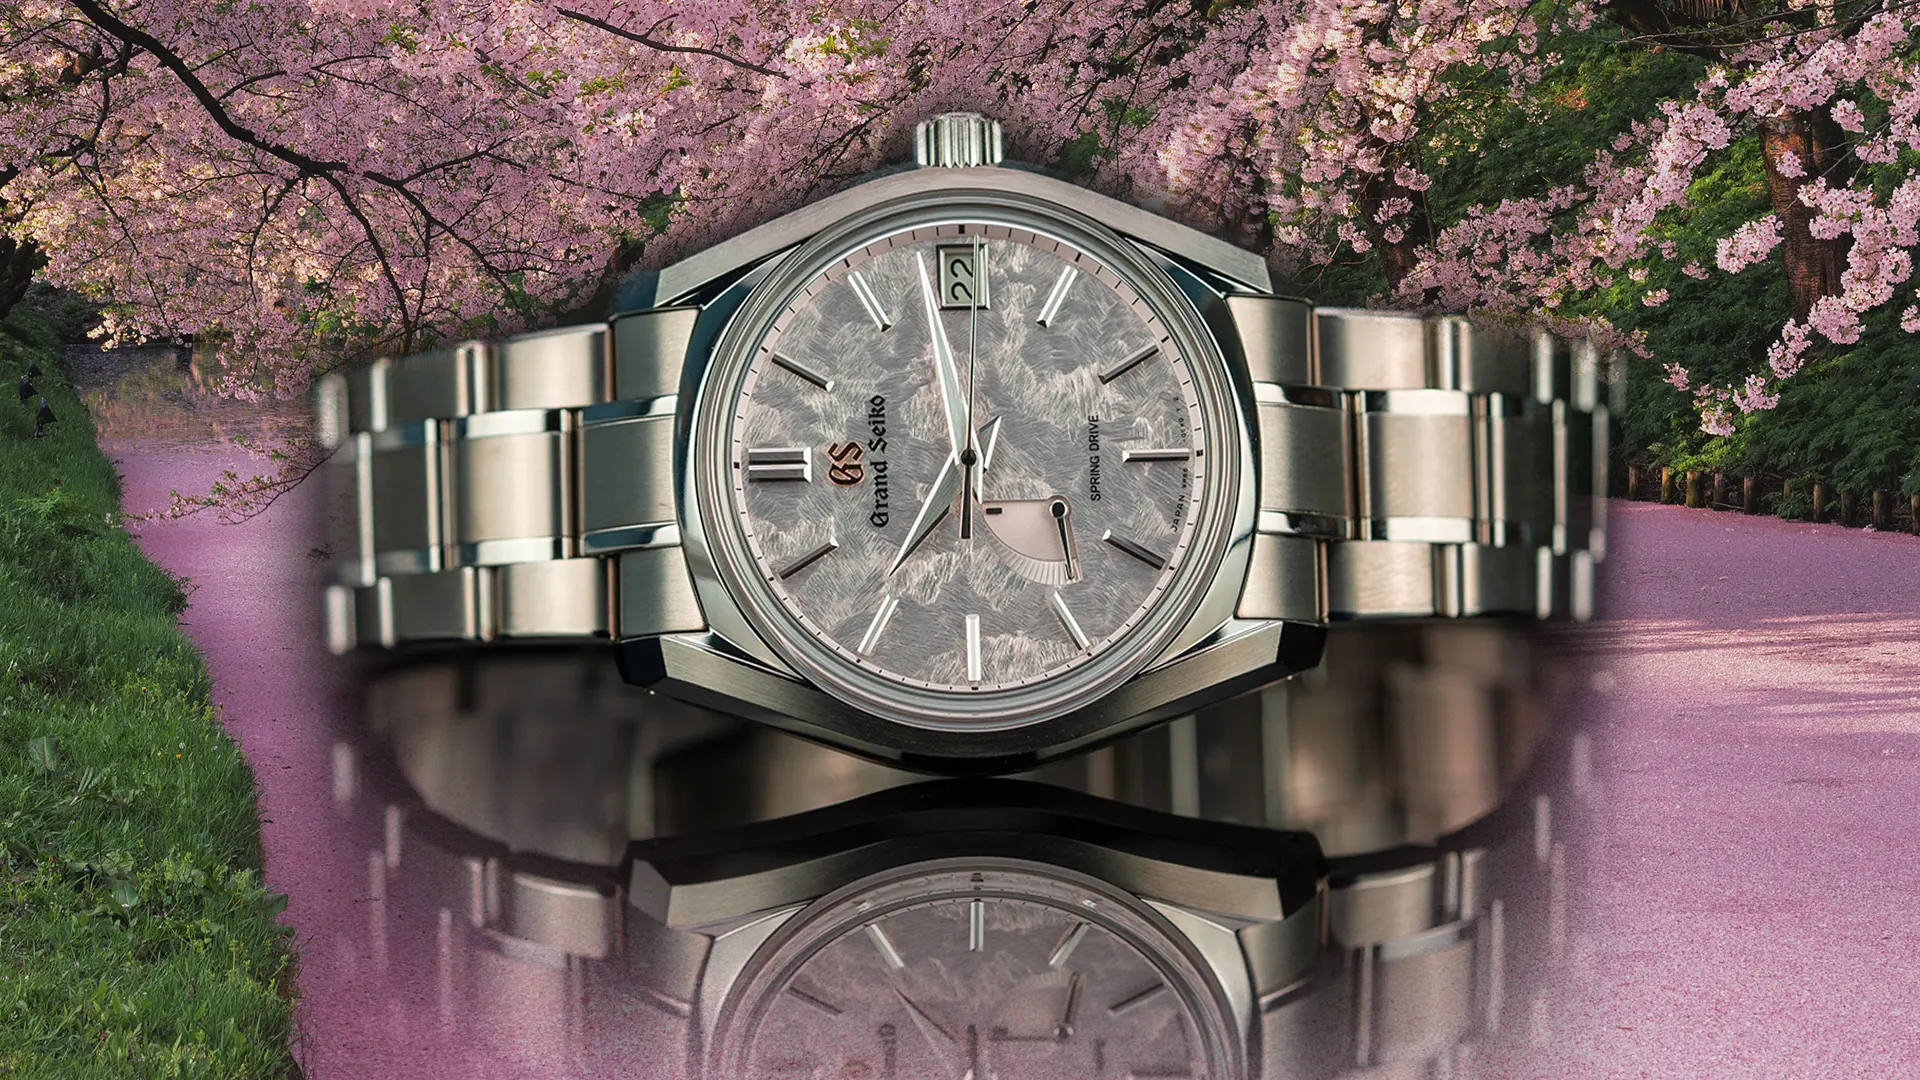 This Grand Seiko changed everything for me